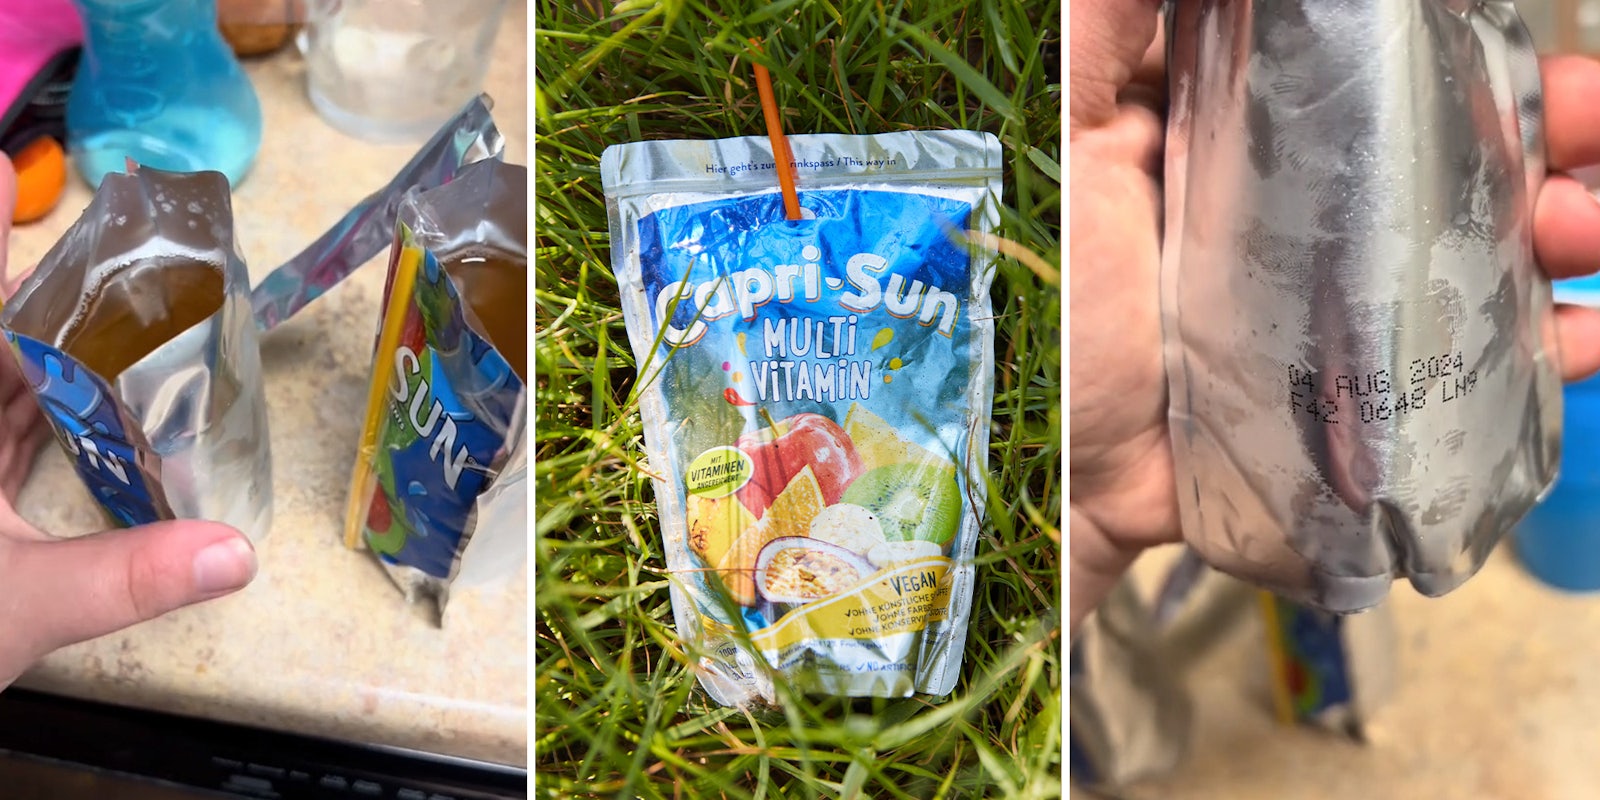 Mom finds something unusual in kid's CapriSun